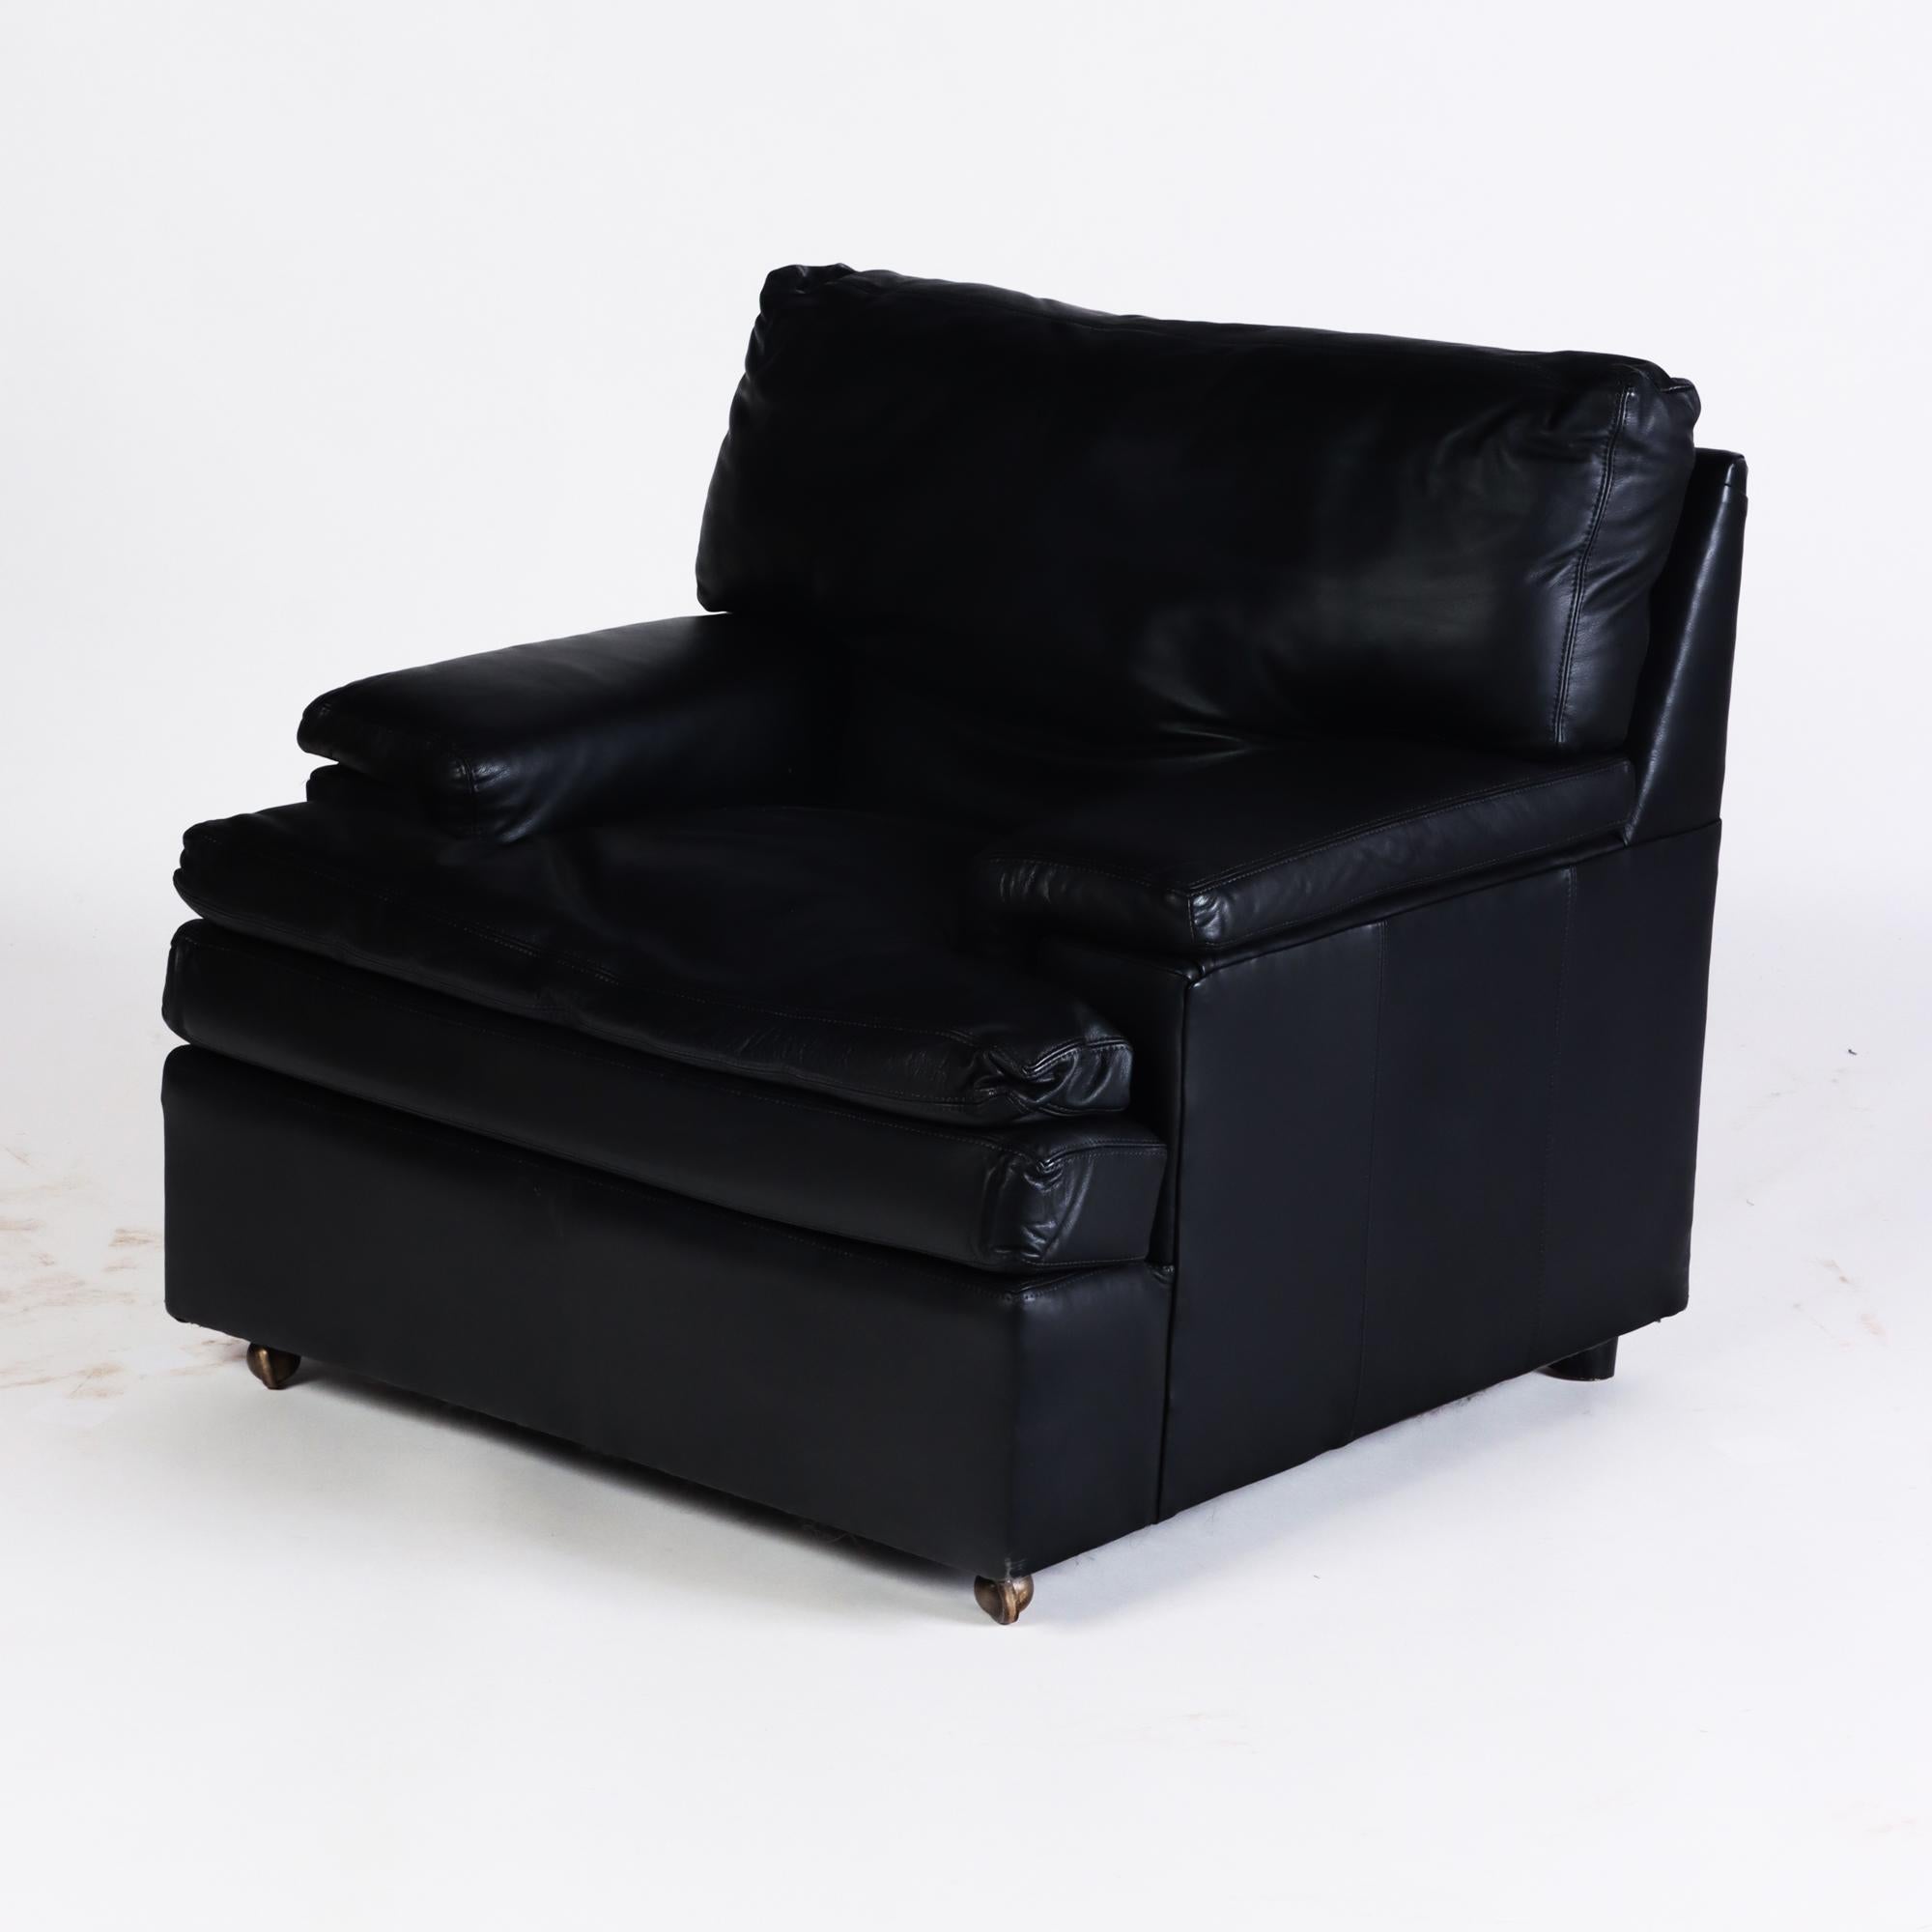 Late 20th Century Pair of French Vintage Roche Bobois Black Leather Club Chairs, circa 1970s